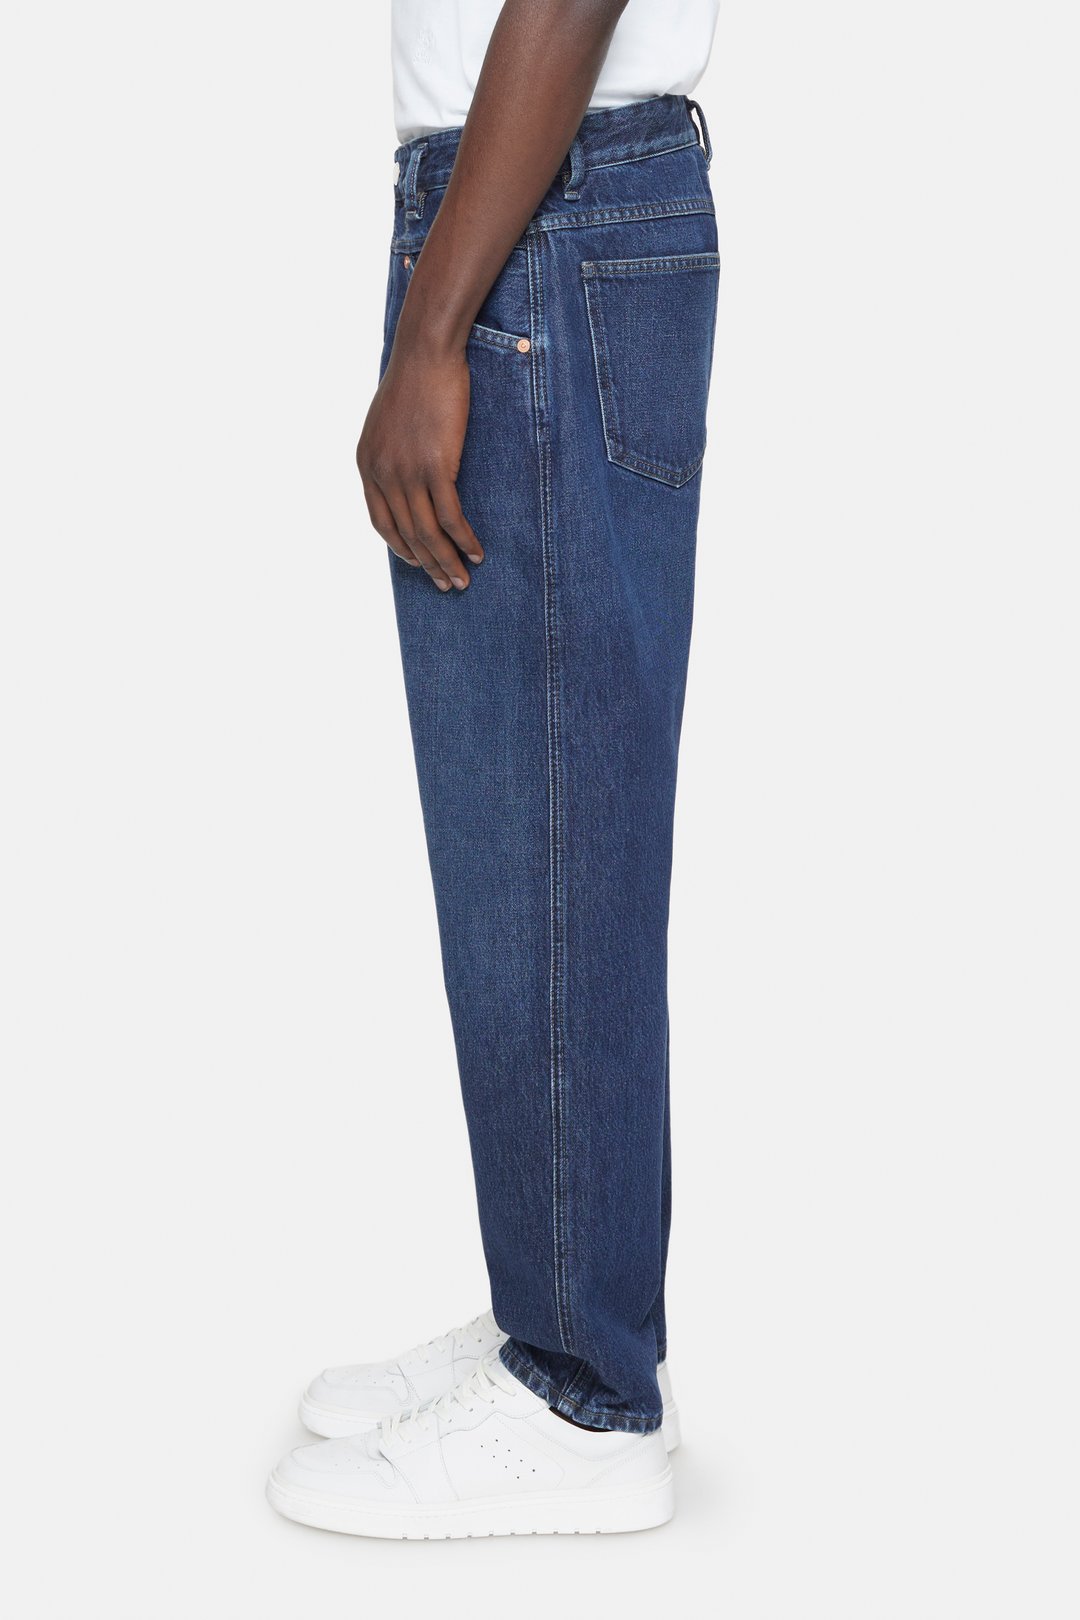 RELAXED JEANS - STYLE NAME X-LENT TAPERED